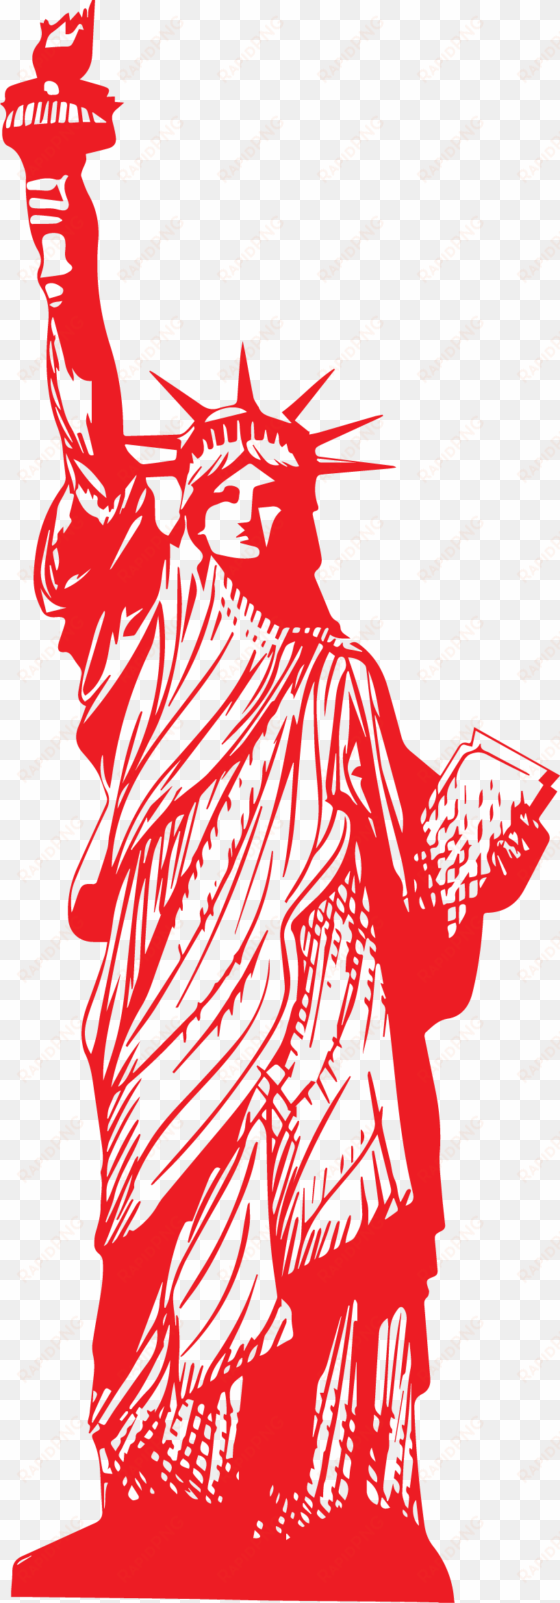 statue of liberty clipart png - statue of liberty clip art red